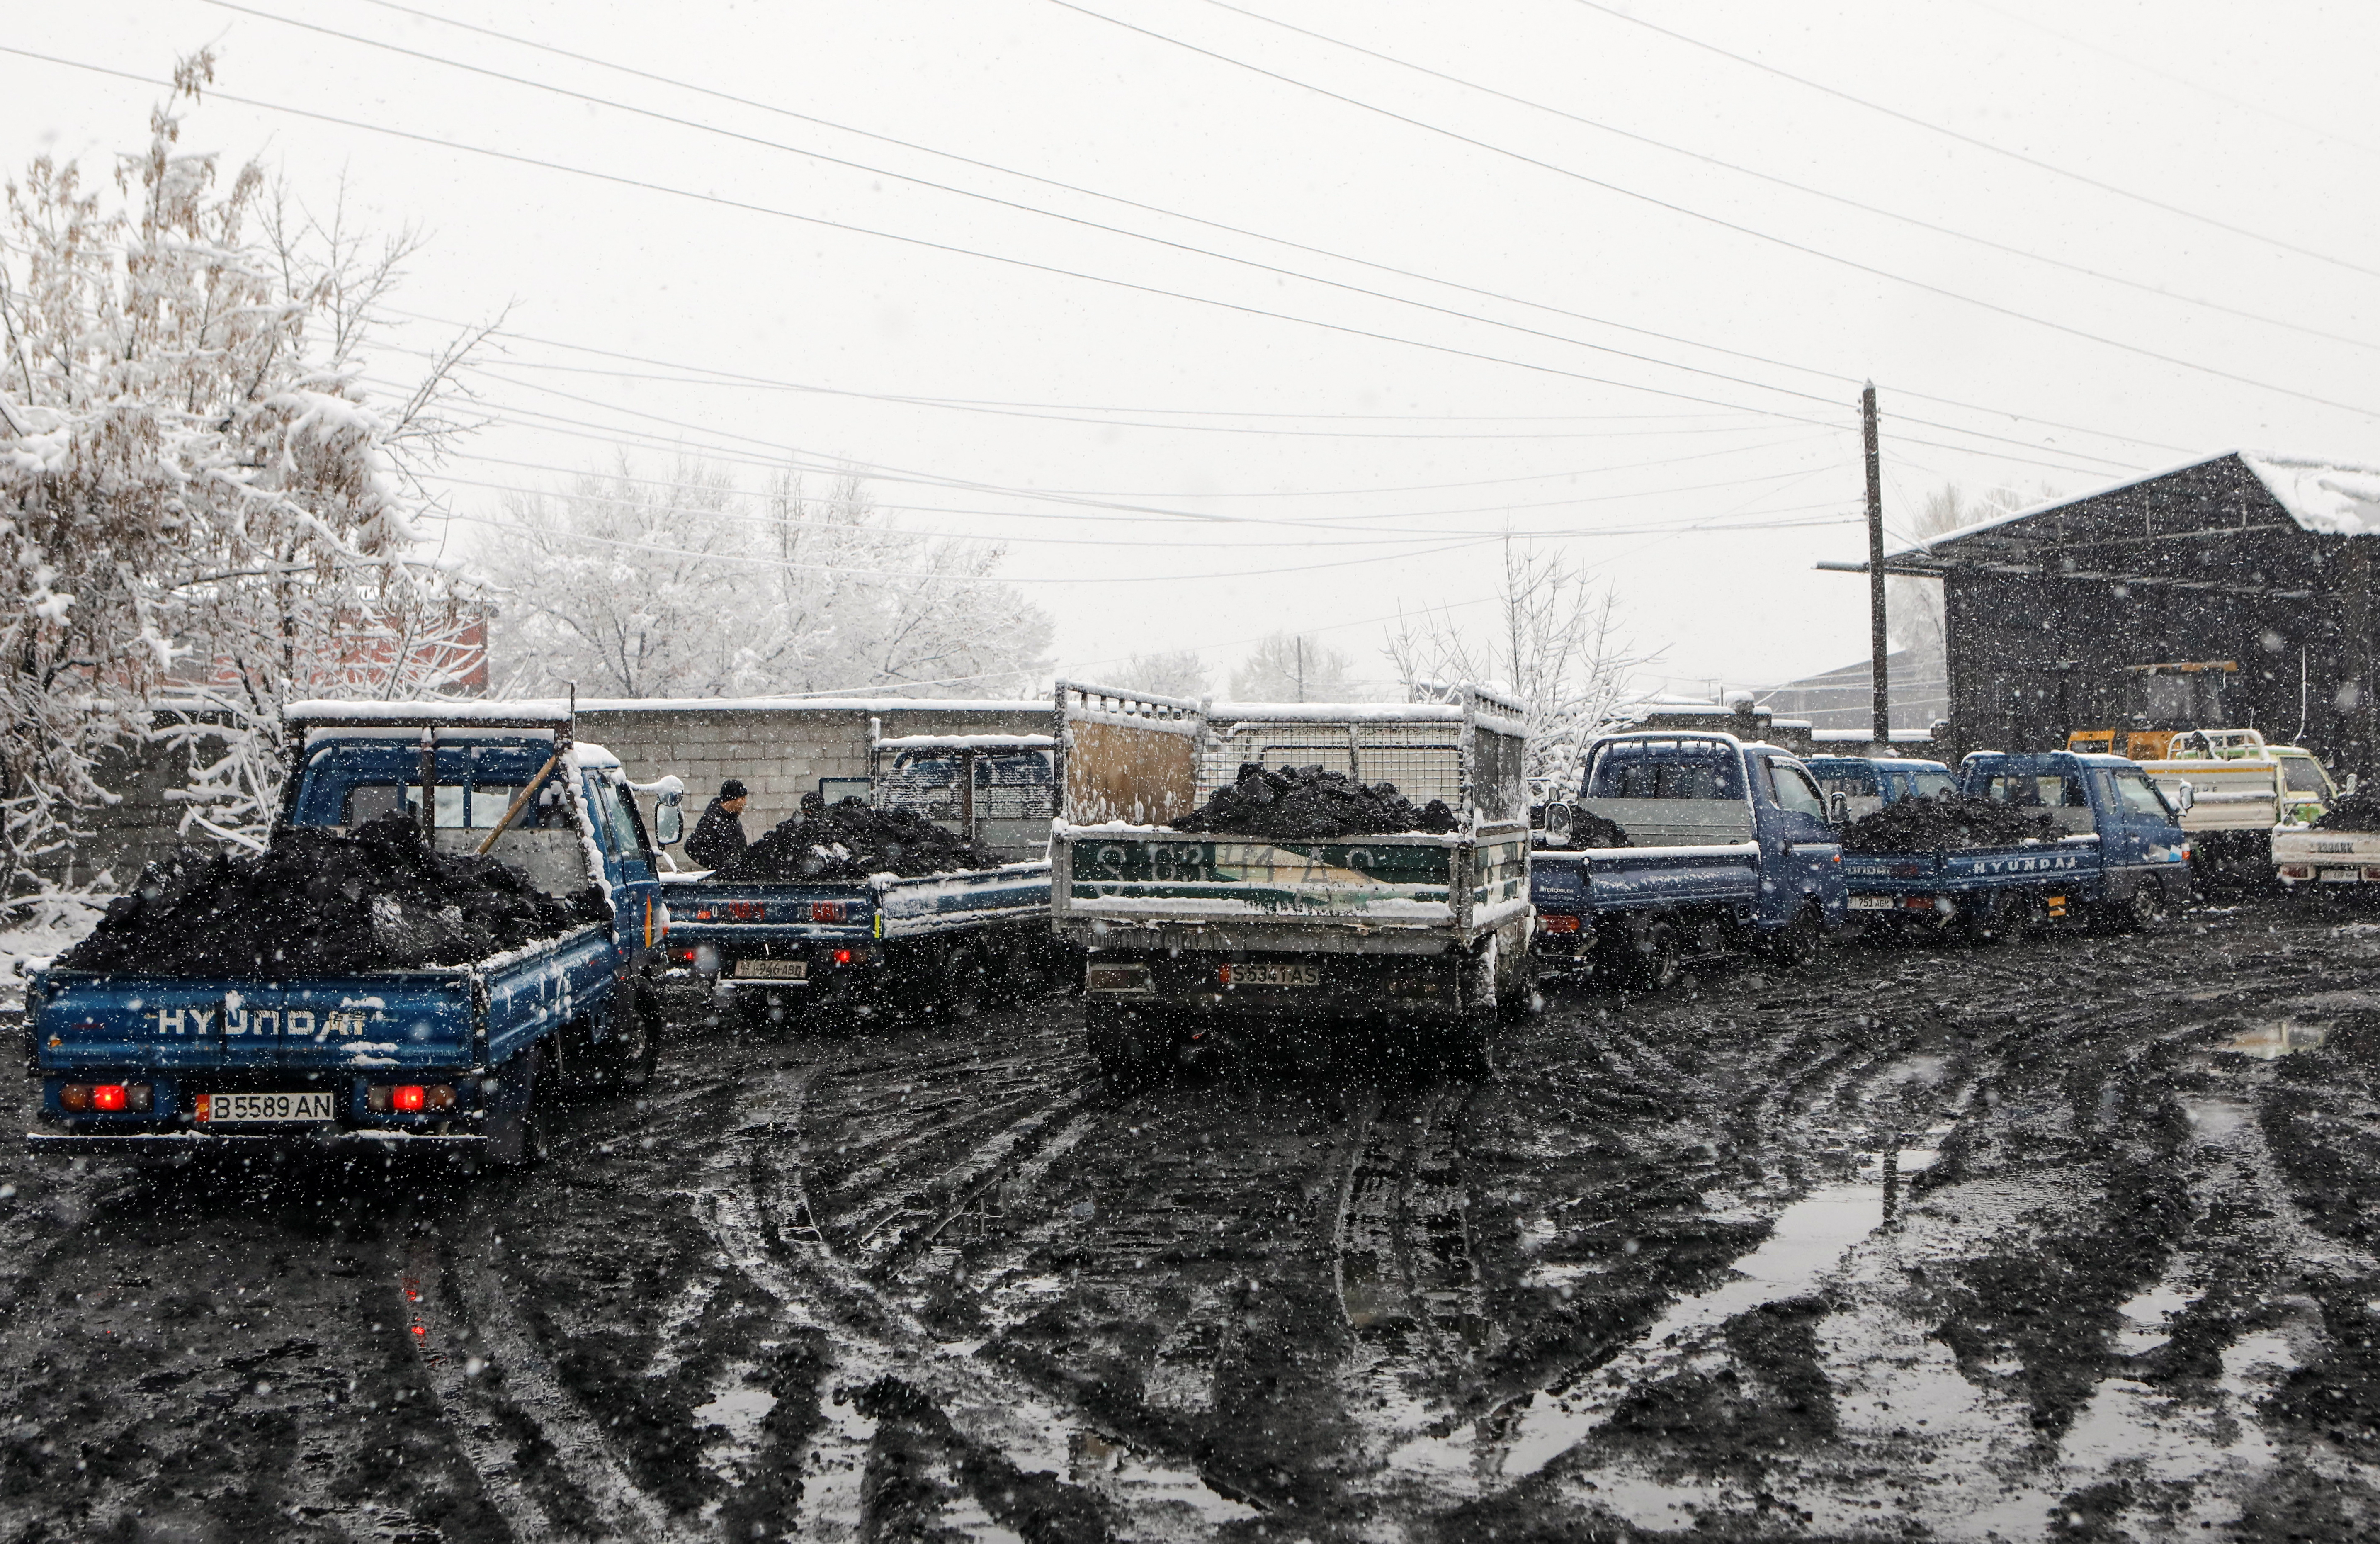 Lorries are seen in a queue for coal that people buy at reduced prices to heat their homes amid the energy crunch, in Bishkek, Kyrgyzstan November 26, 2021.  REUTERS/Vladimir Pirogov